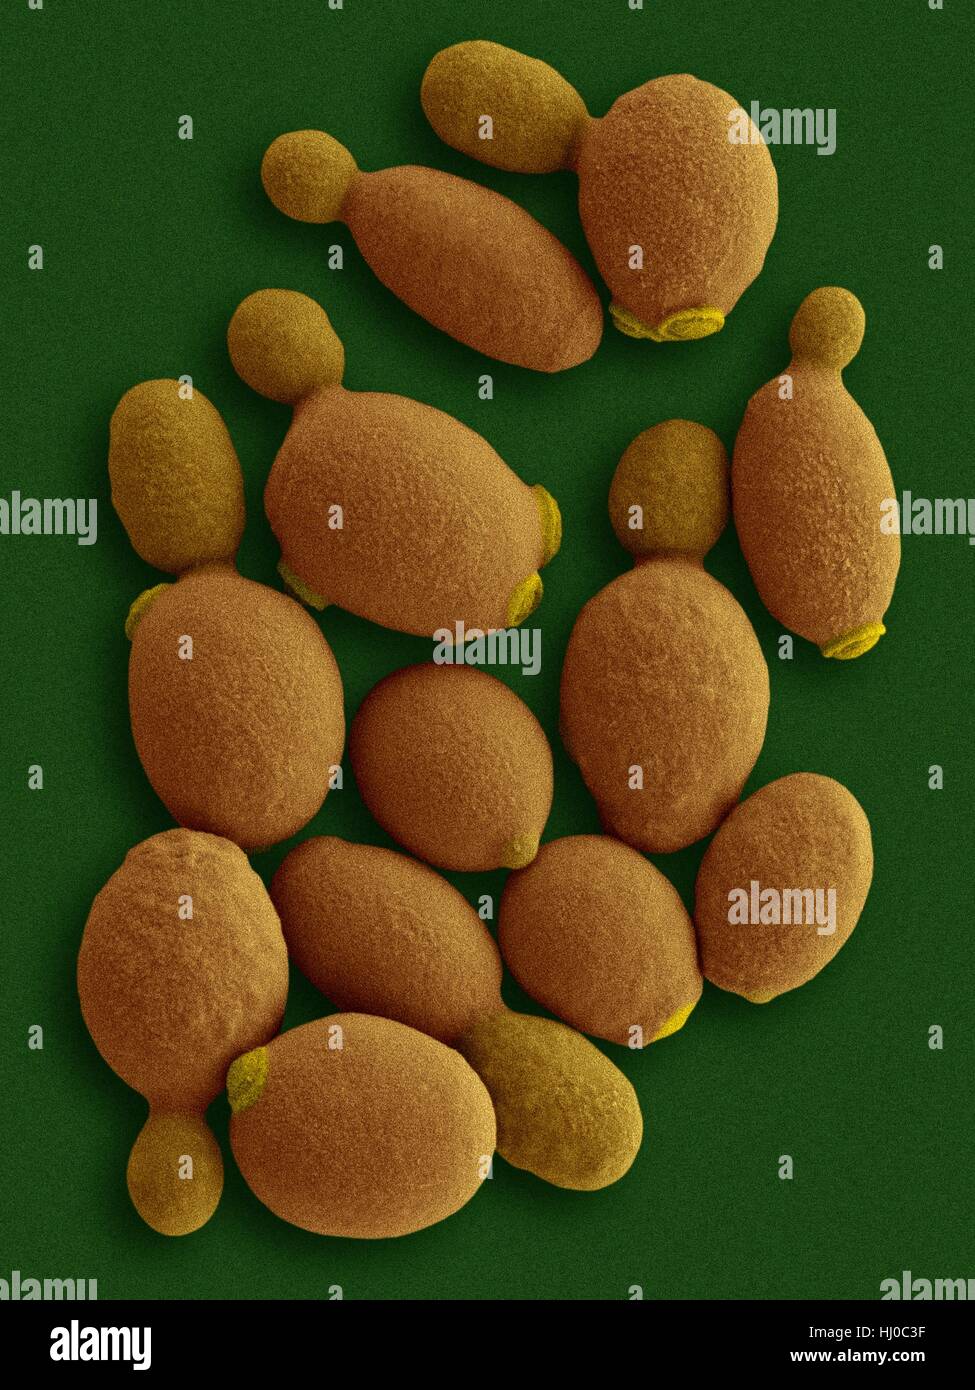 Coloured scanning electron micrograph (SEM) of Komagataella phaffii - methylotrophic yeast.Komagataella phaffii is newly identified yeast that has methanol-assimilating capabilities.It can use methanol as sole carbon source when glycerol or glucose is not found as food source.Shown hear are yeast Stock Photo